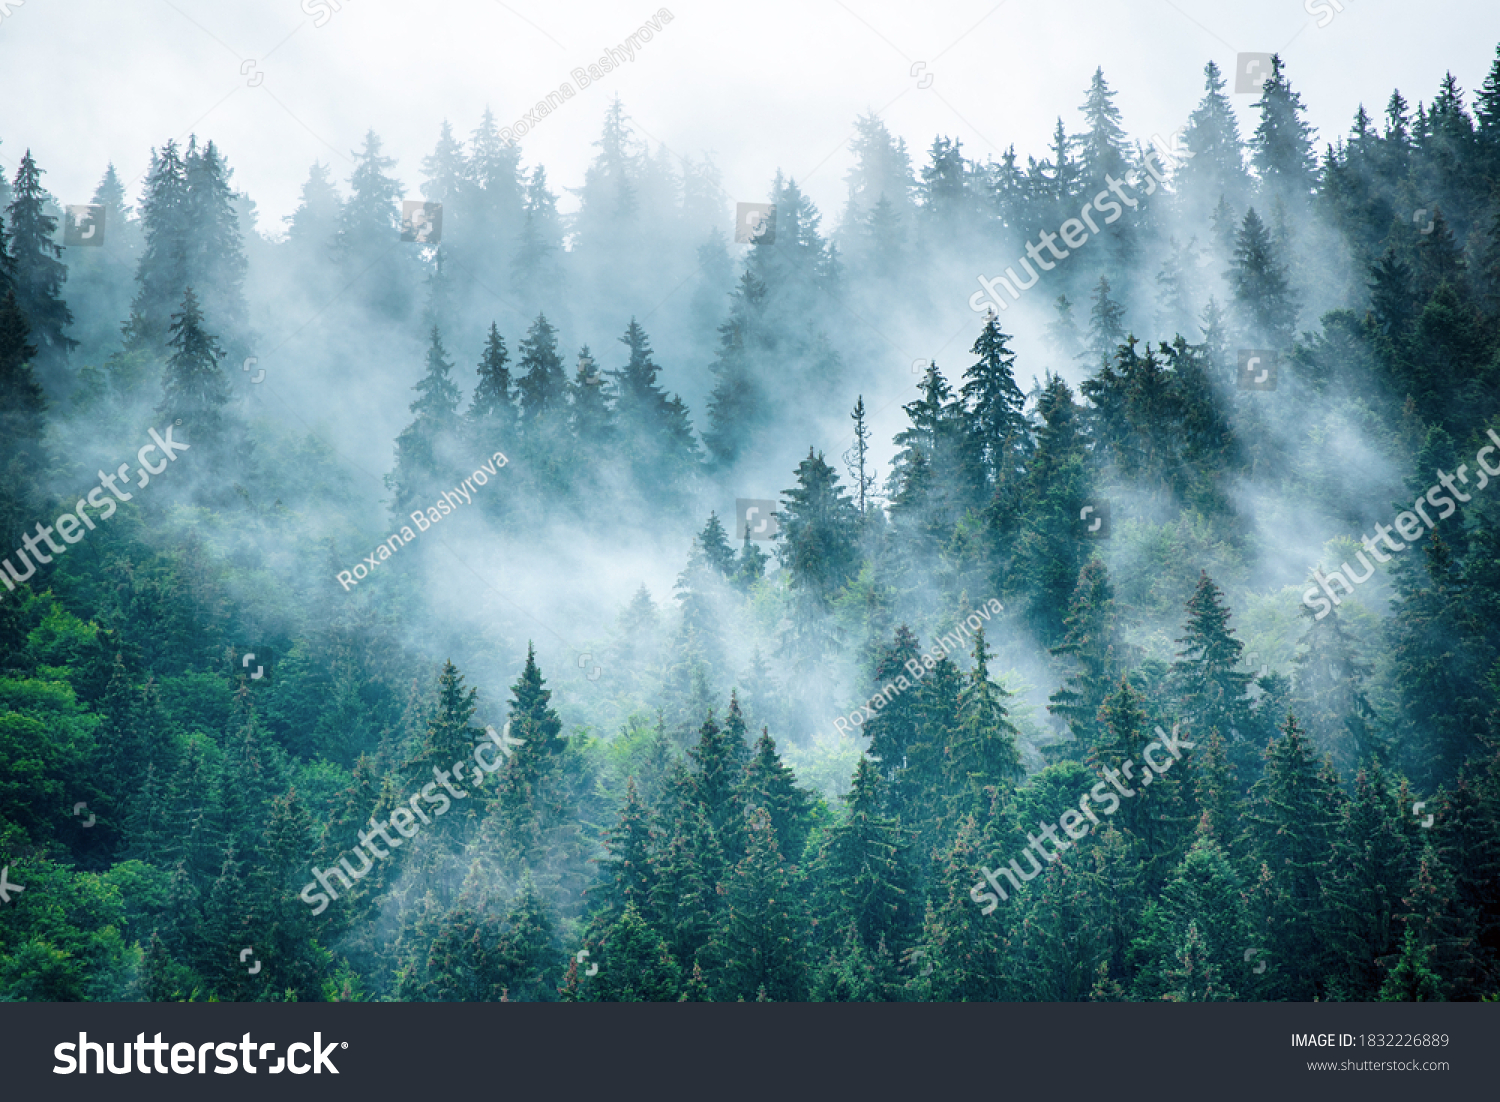 Misty foggy mountain landscape with fir forest and copyspace in vintage retro hipster style #1832226889